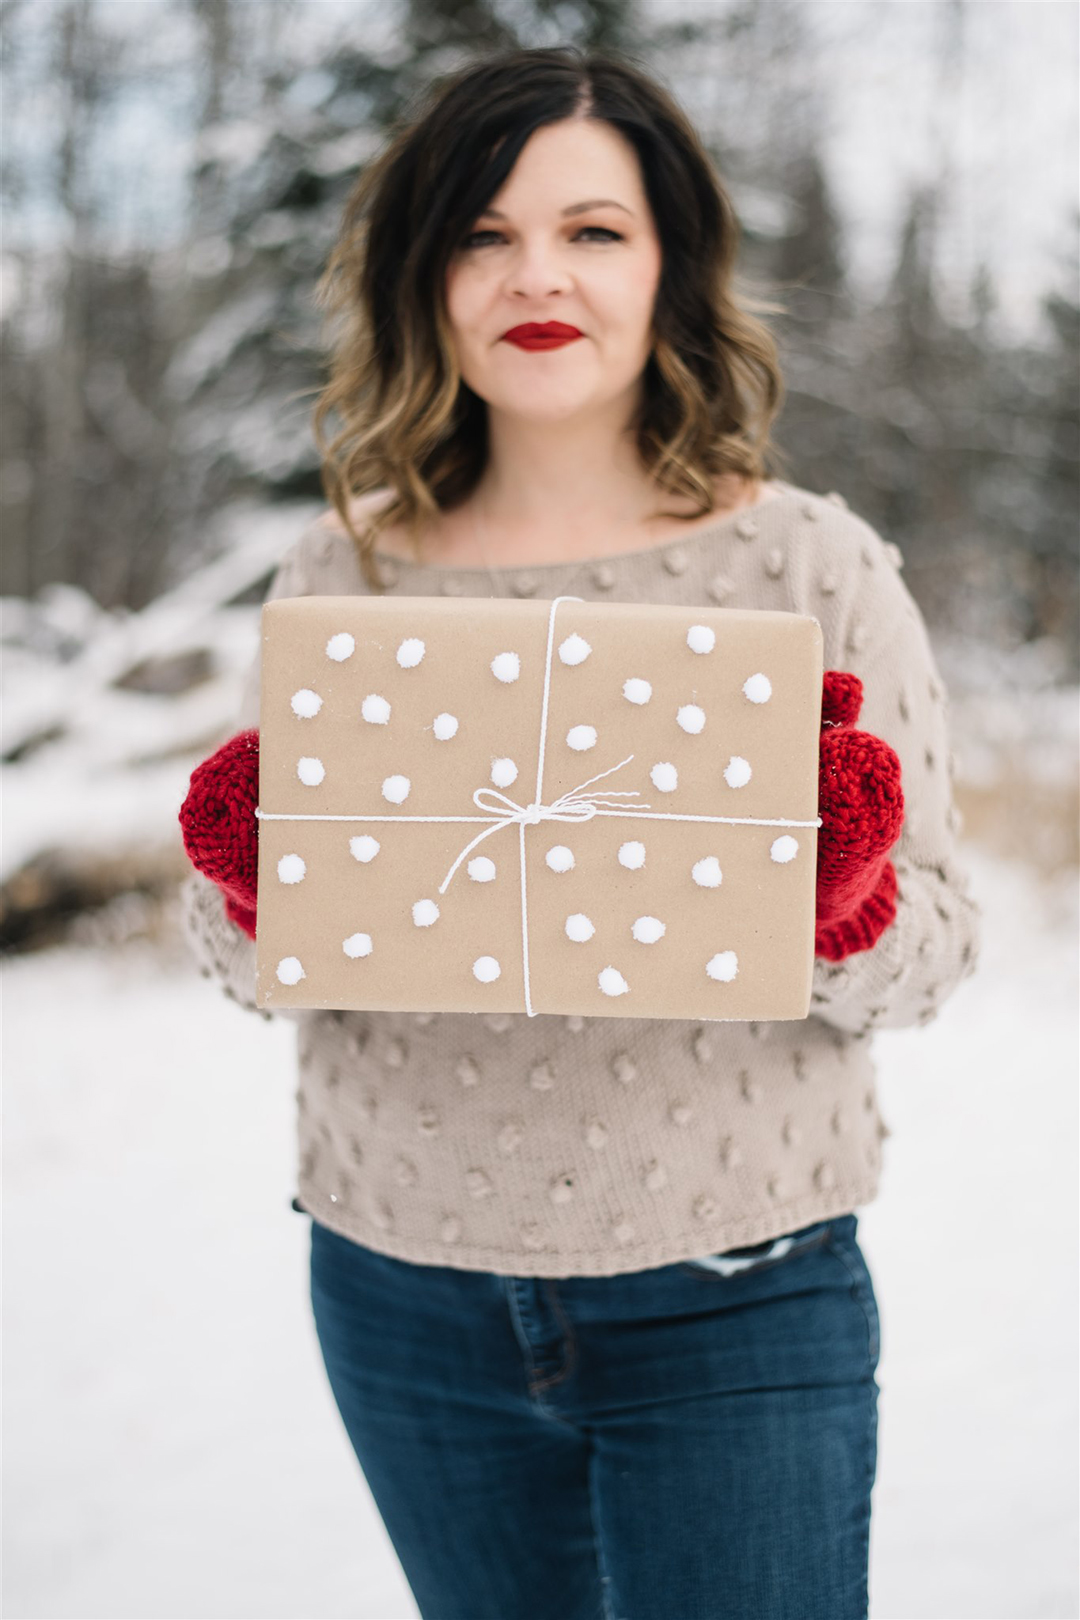 Brown Paper & Pom Pom Gift Wrapping Ideas